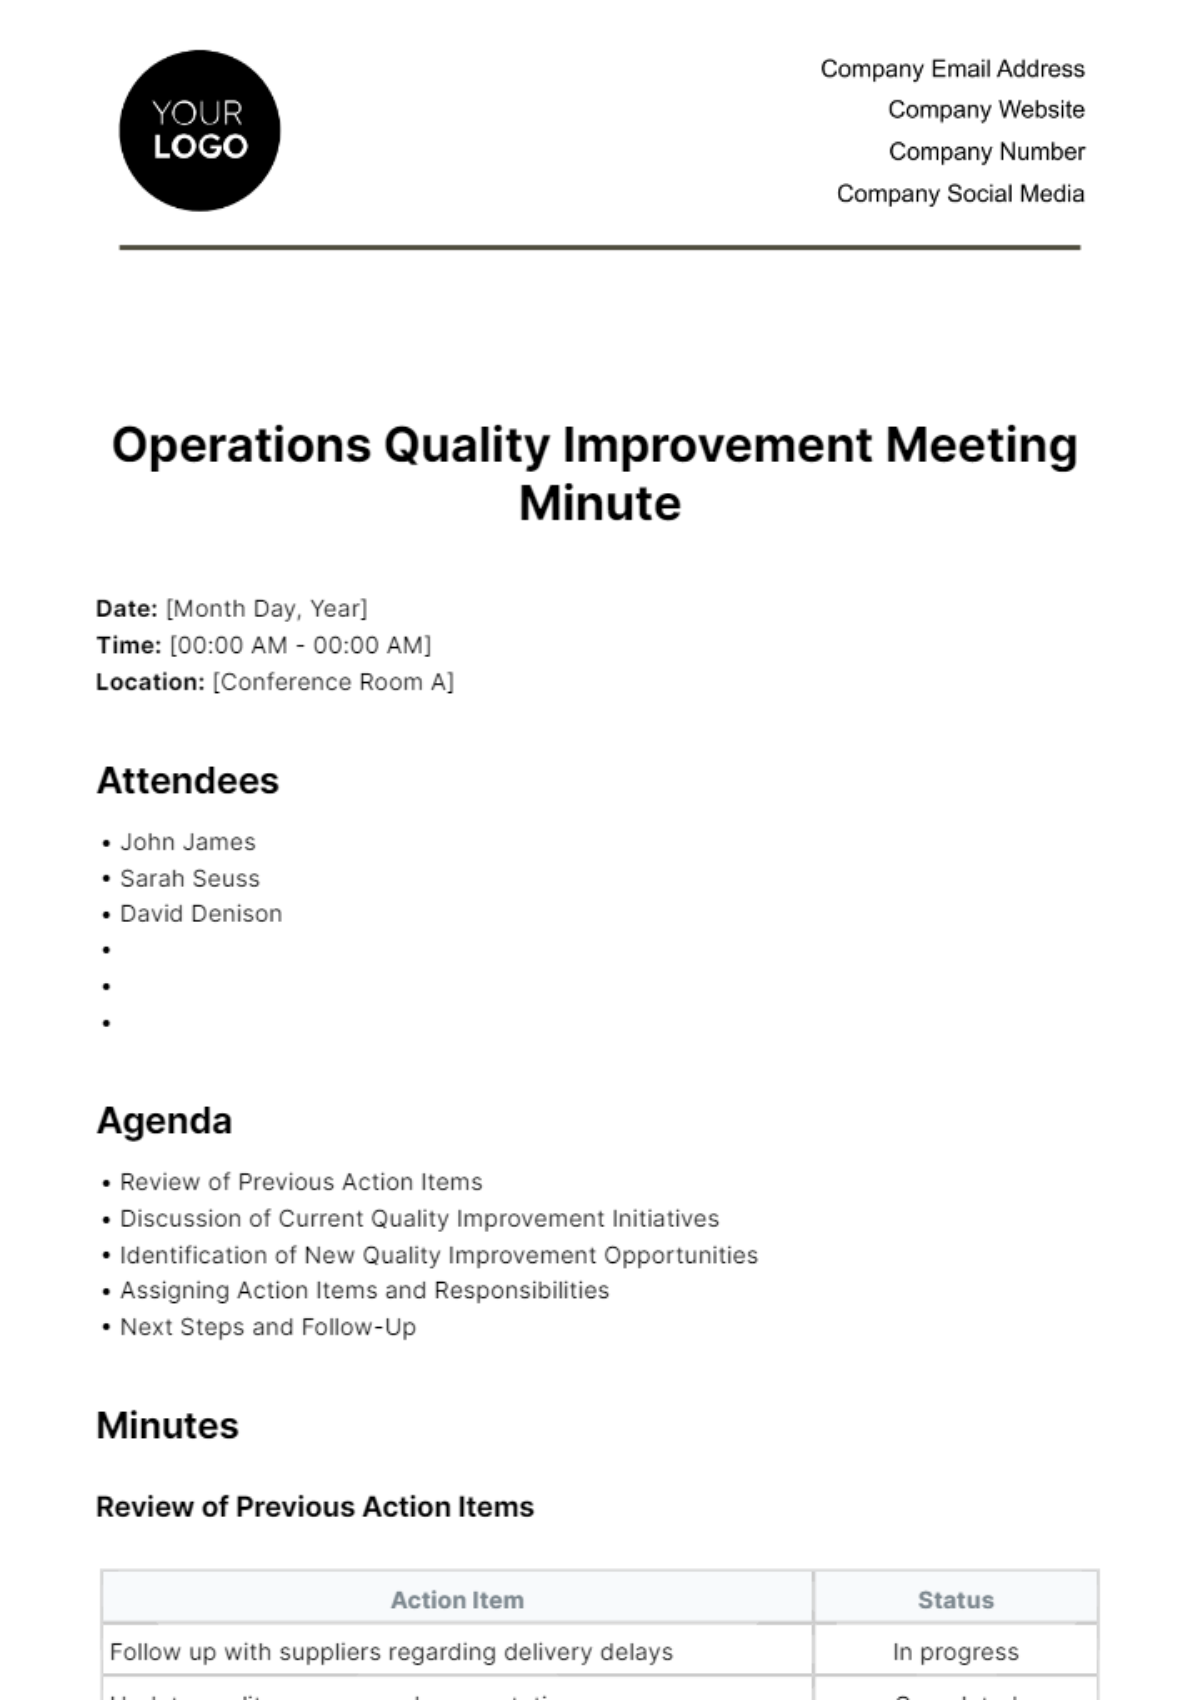 Free Operations Quality Improvement Meeting Minute Template